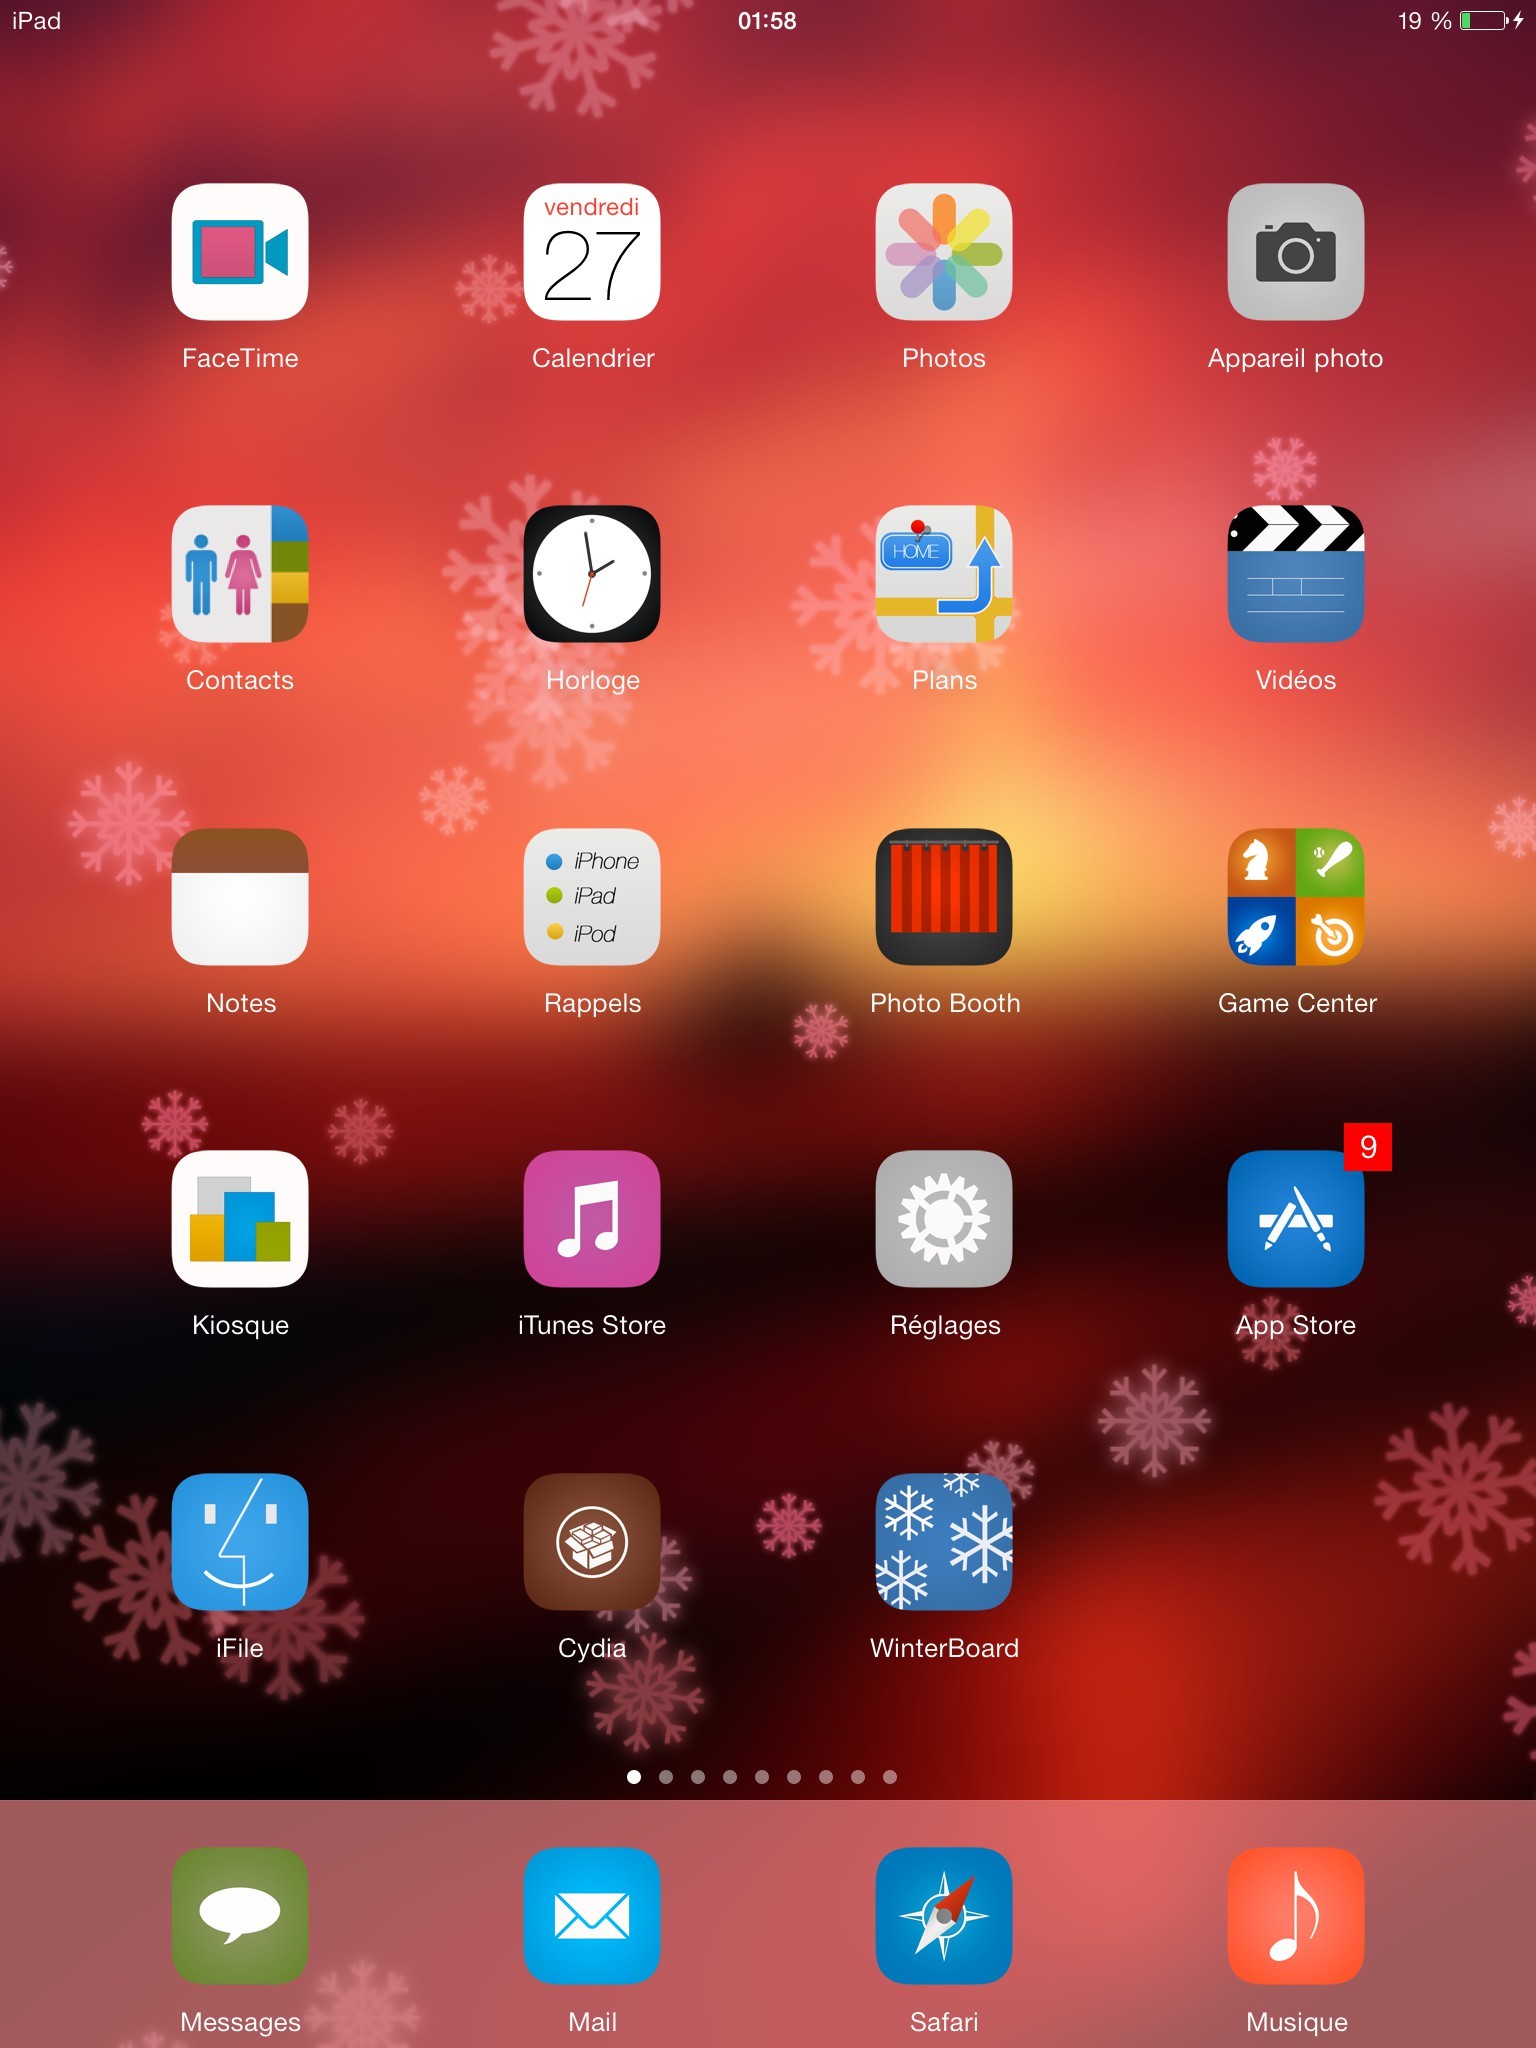 Ultimate How To Get Live Wallpaper On Ipad Mini 5 for Gamers